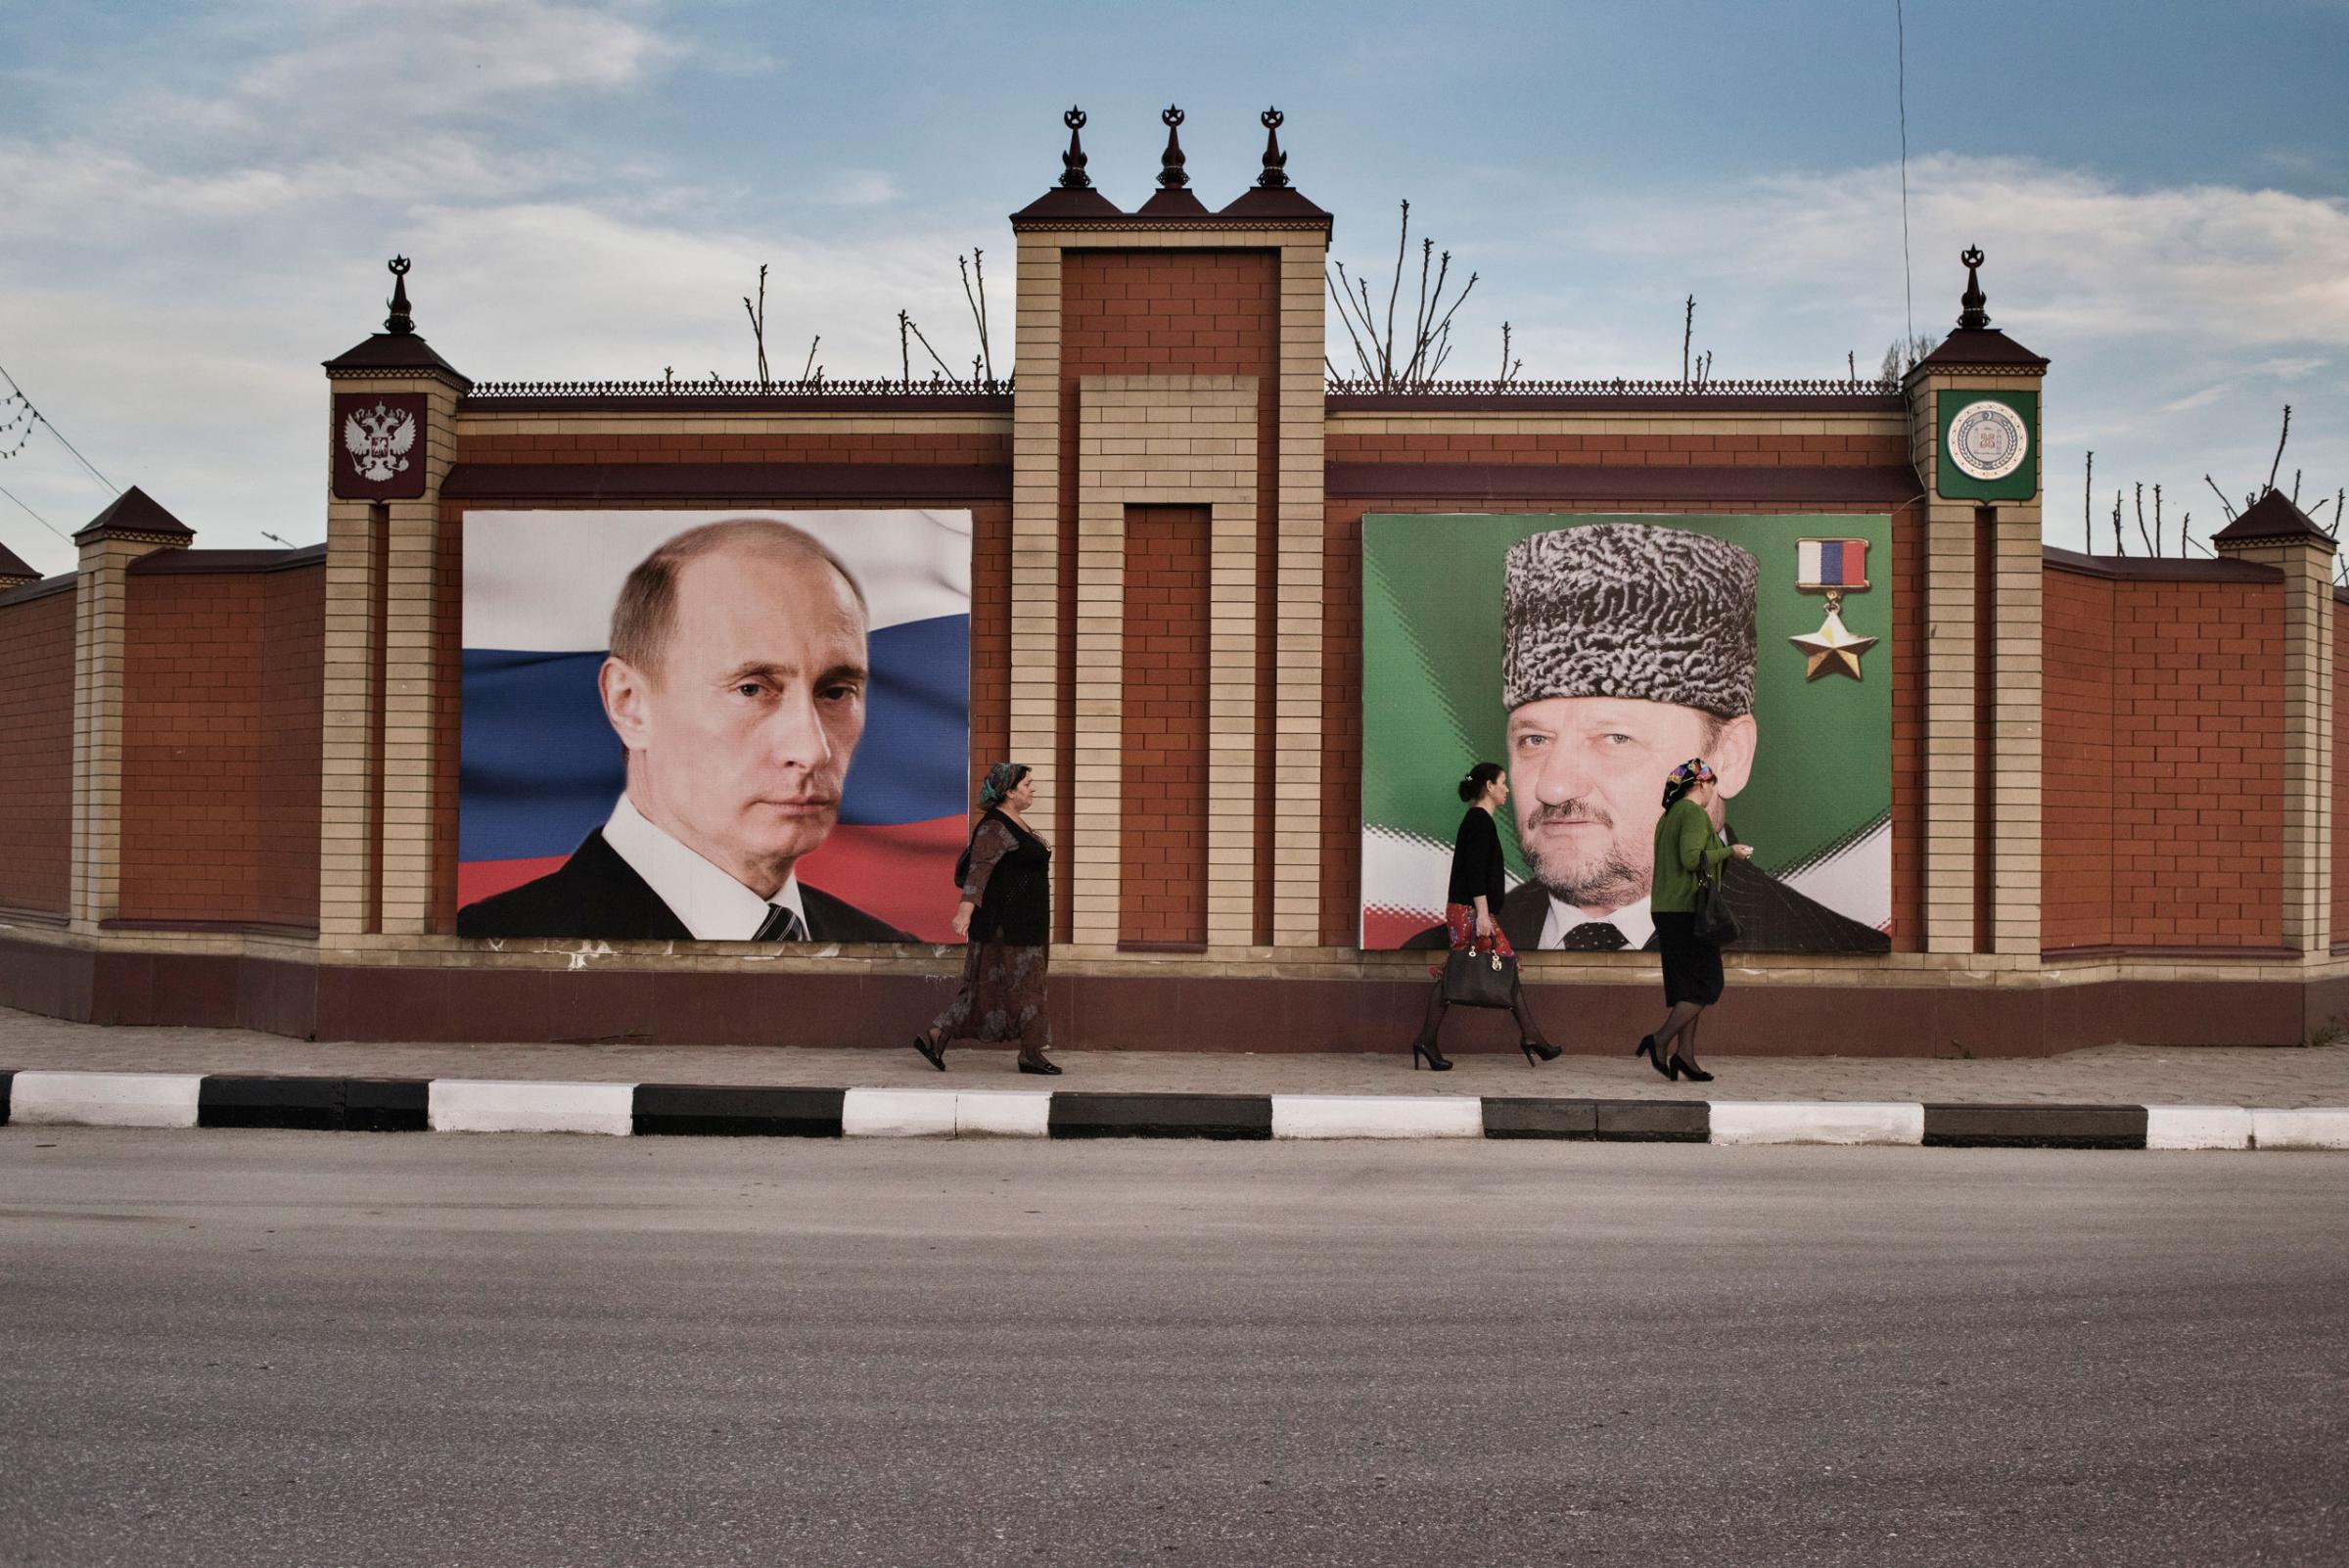 Women walk past a portrait of Russian President Vladimir Putin and the late President of Chechnya, Akhmad Kadyrov, He was the father of Chechnya's current leader, Ramzan Kadyrov, Grozny, Chechnya, April, 2015. Yuri kozyrev—NOOR for TIME